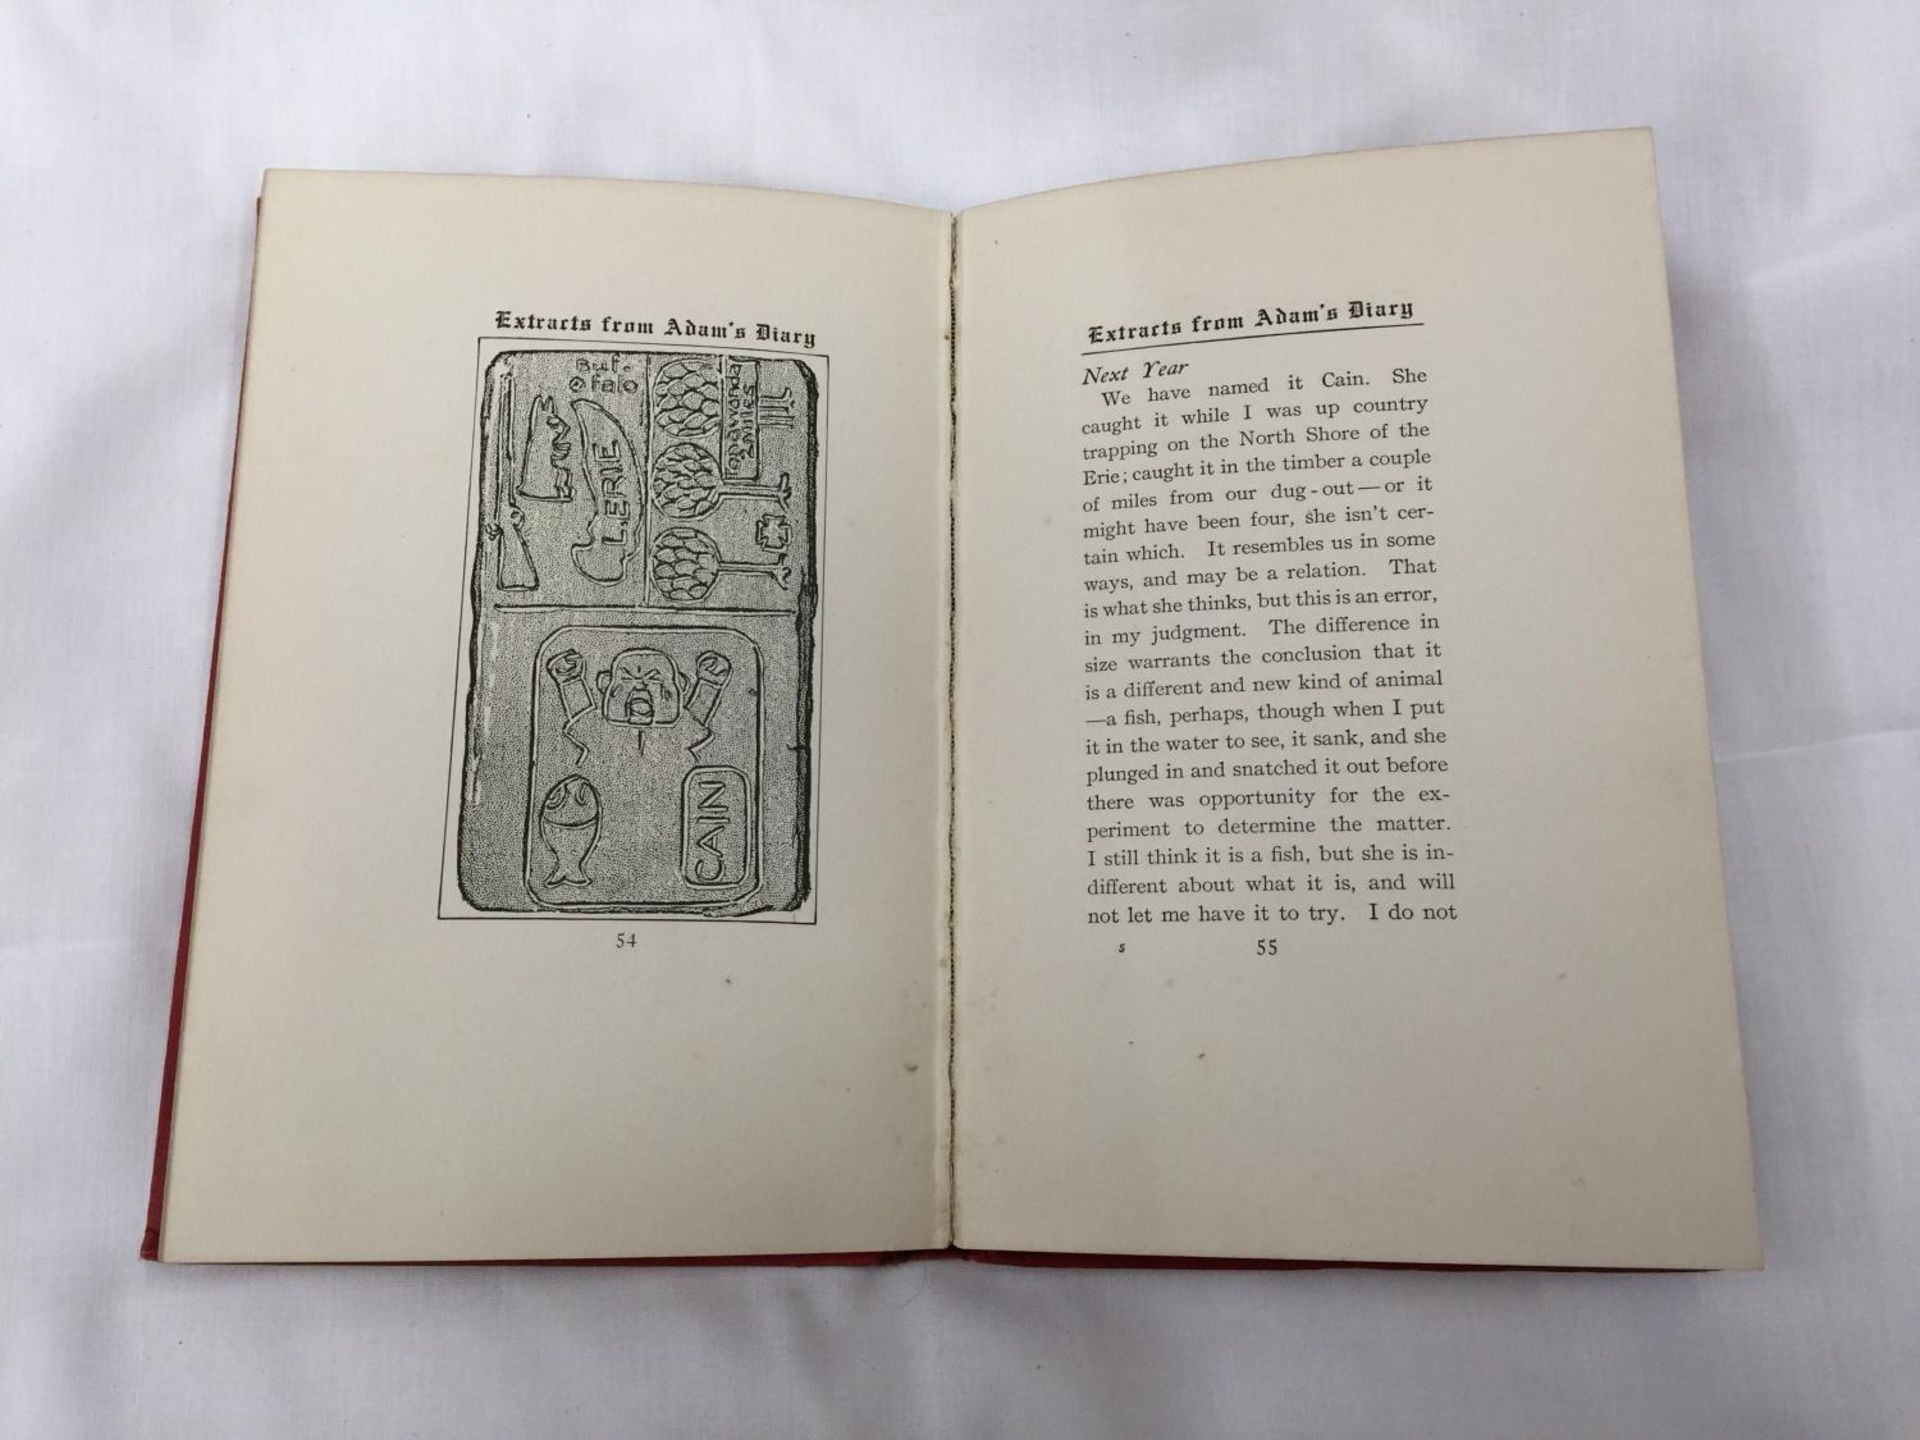 A FIRST EDITION EXTRACTS FROM ADAM'S DIARY HARDBACK BY MARK TWAIN - PUBLISHED 1904 BY HARPER & - Image 5 of 7